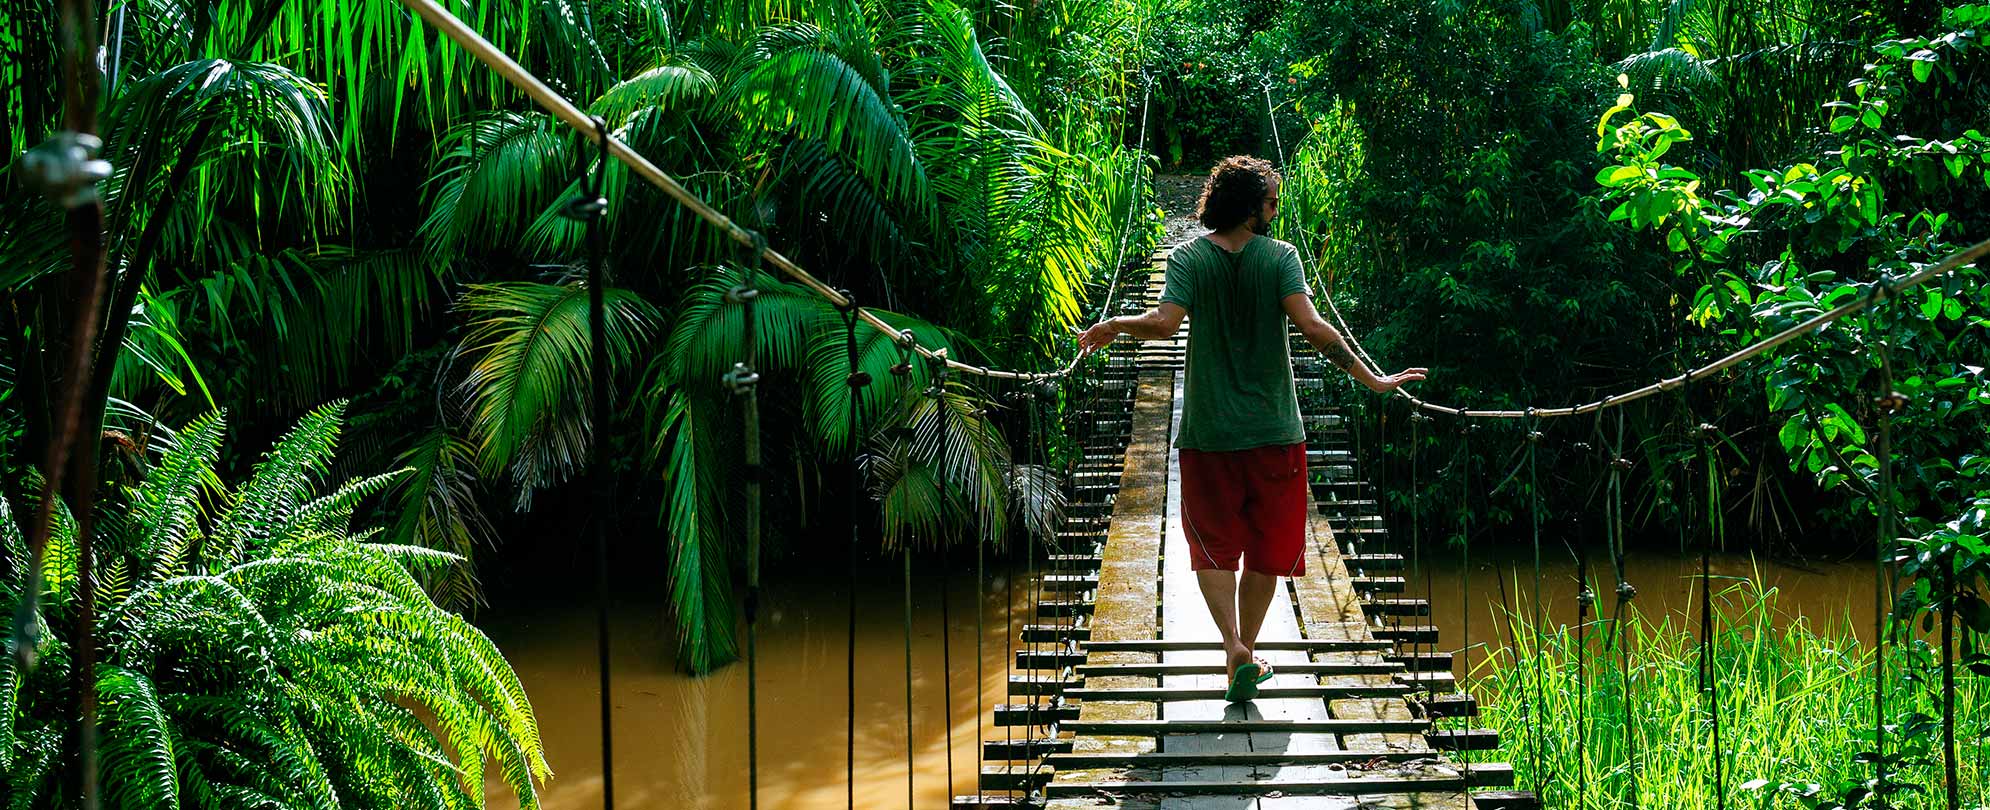 A person walking across a small bridge surrounded by lush landscape in the Panama Canal with Club Wyndham.